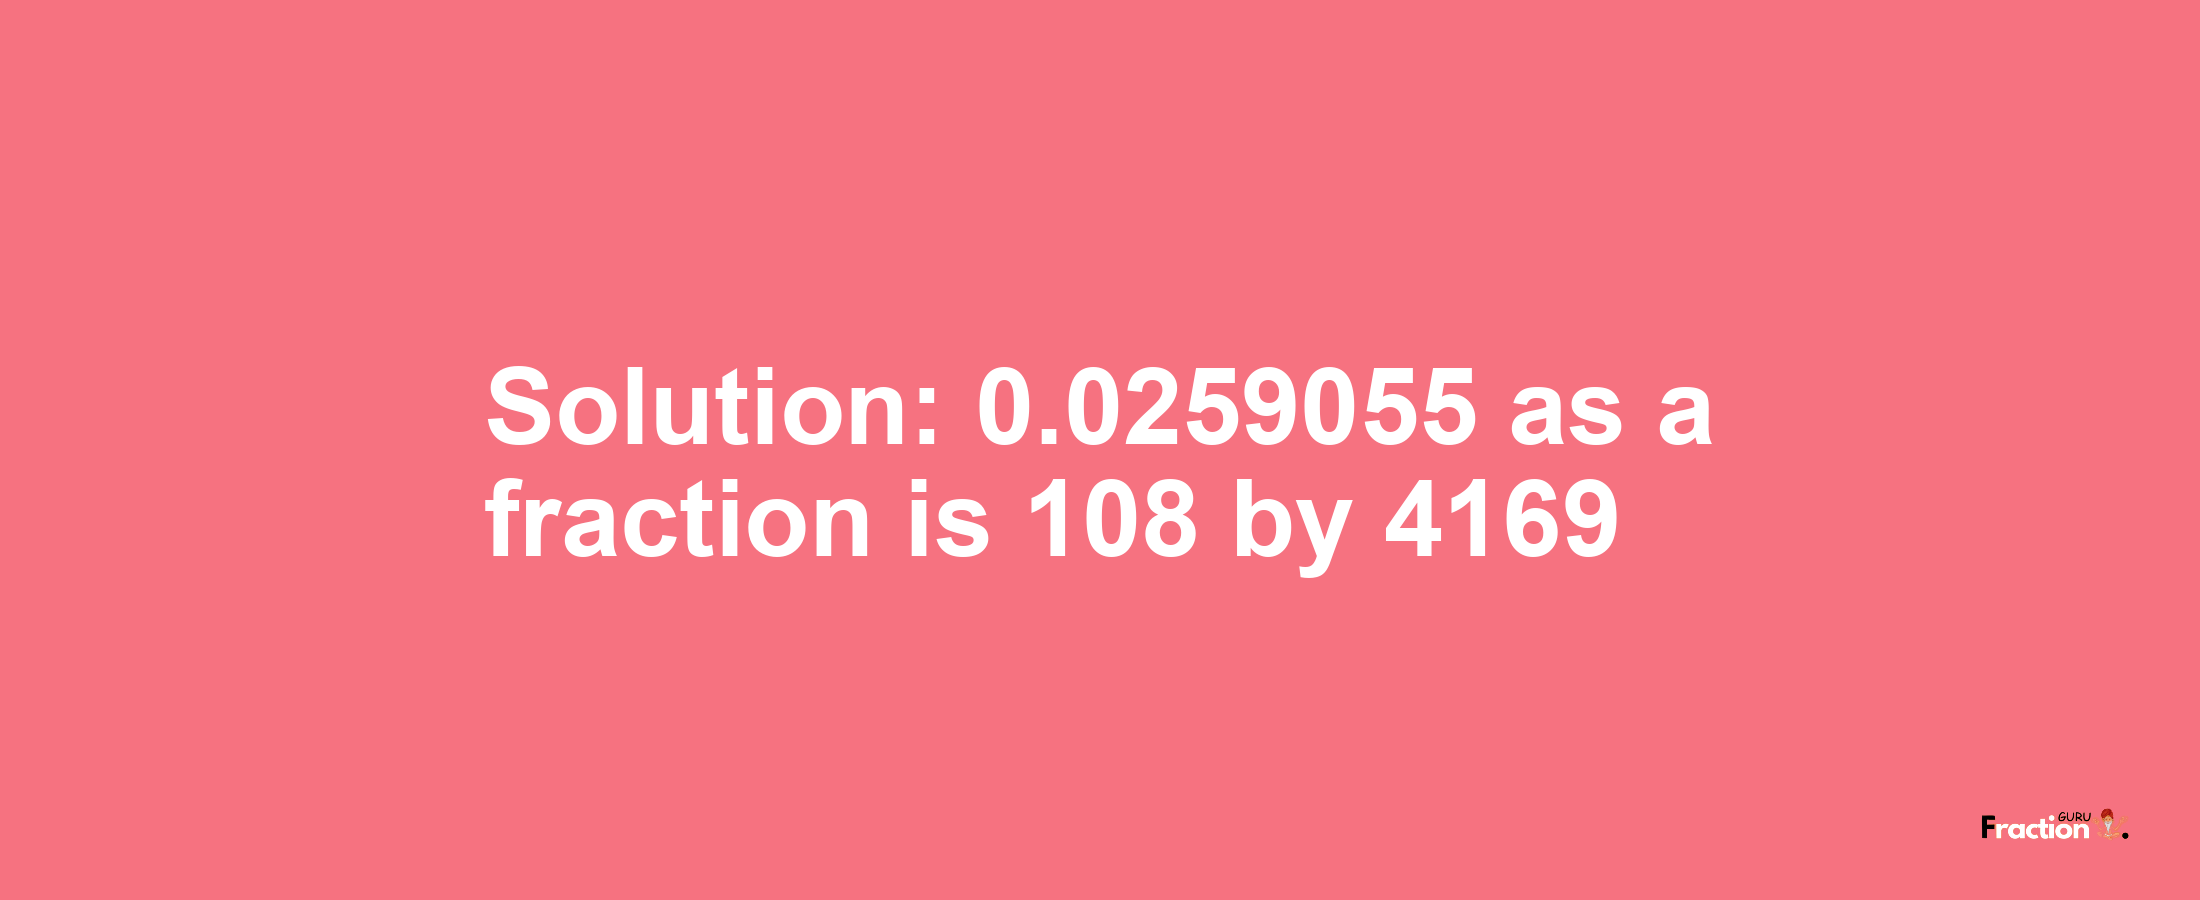 Solution:0.0259055 as a fraction is 108/4169